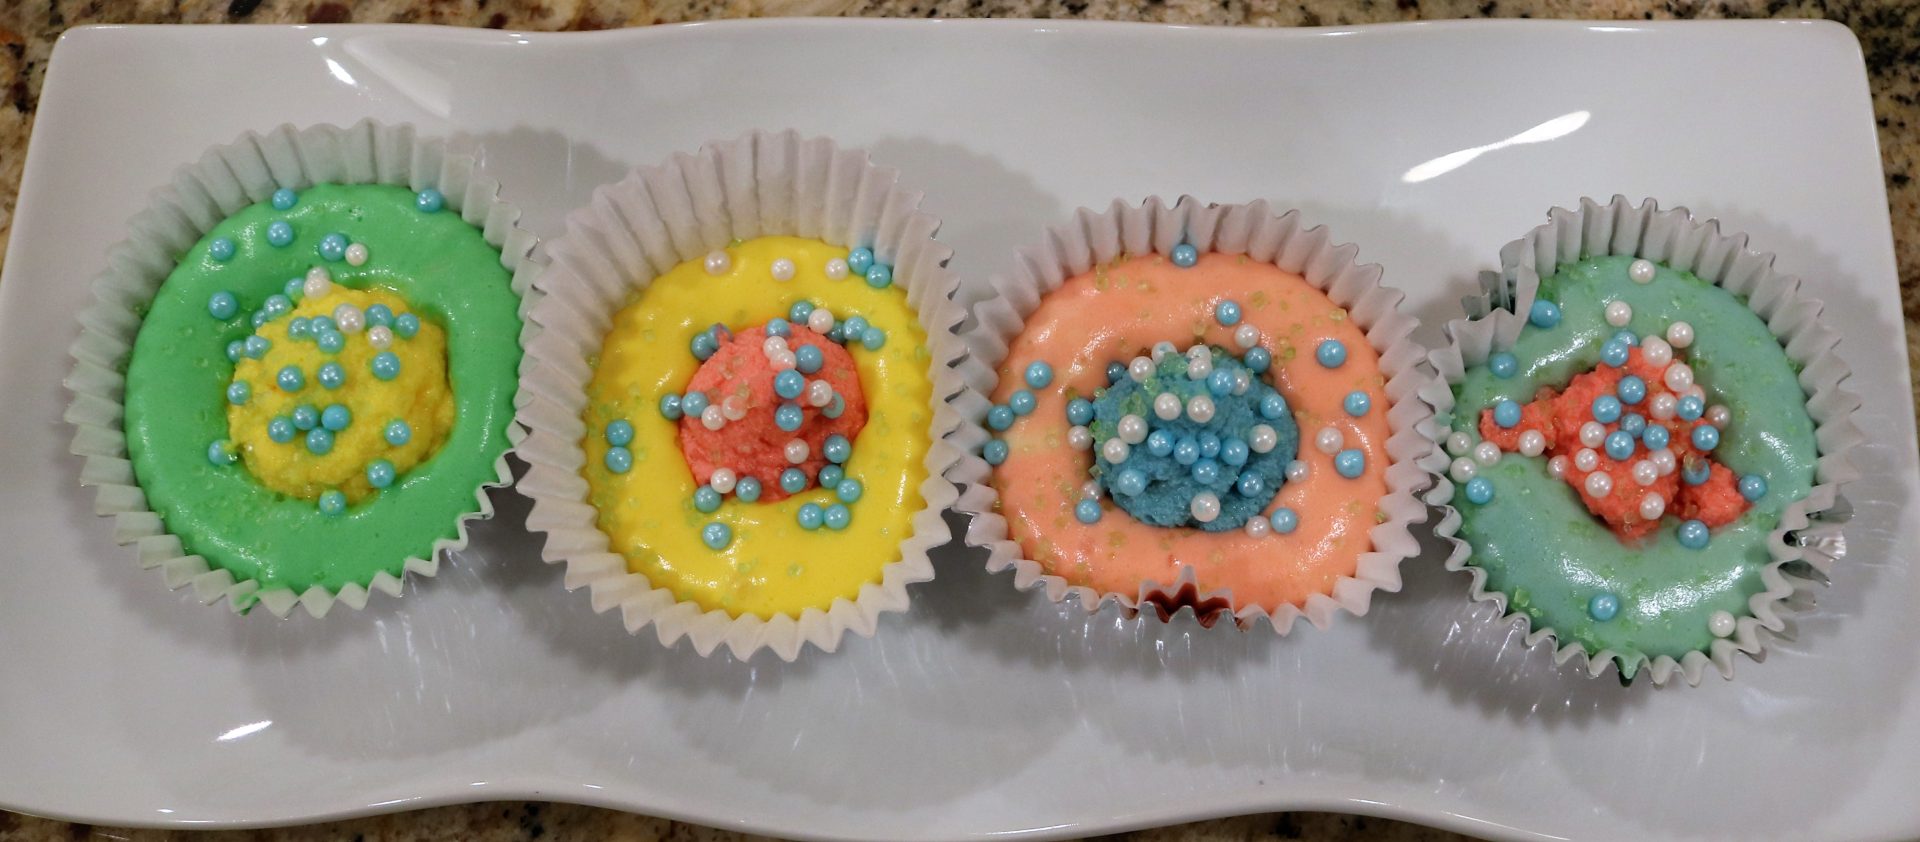 Two cupcakes with different colored frosting and sprinkles.